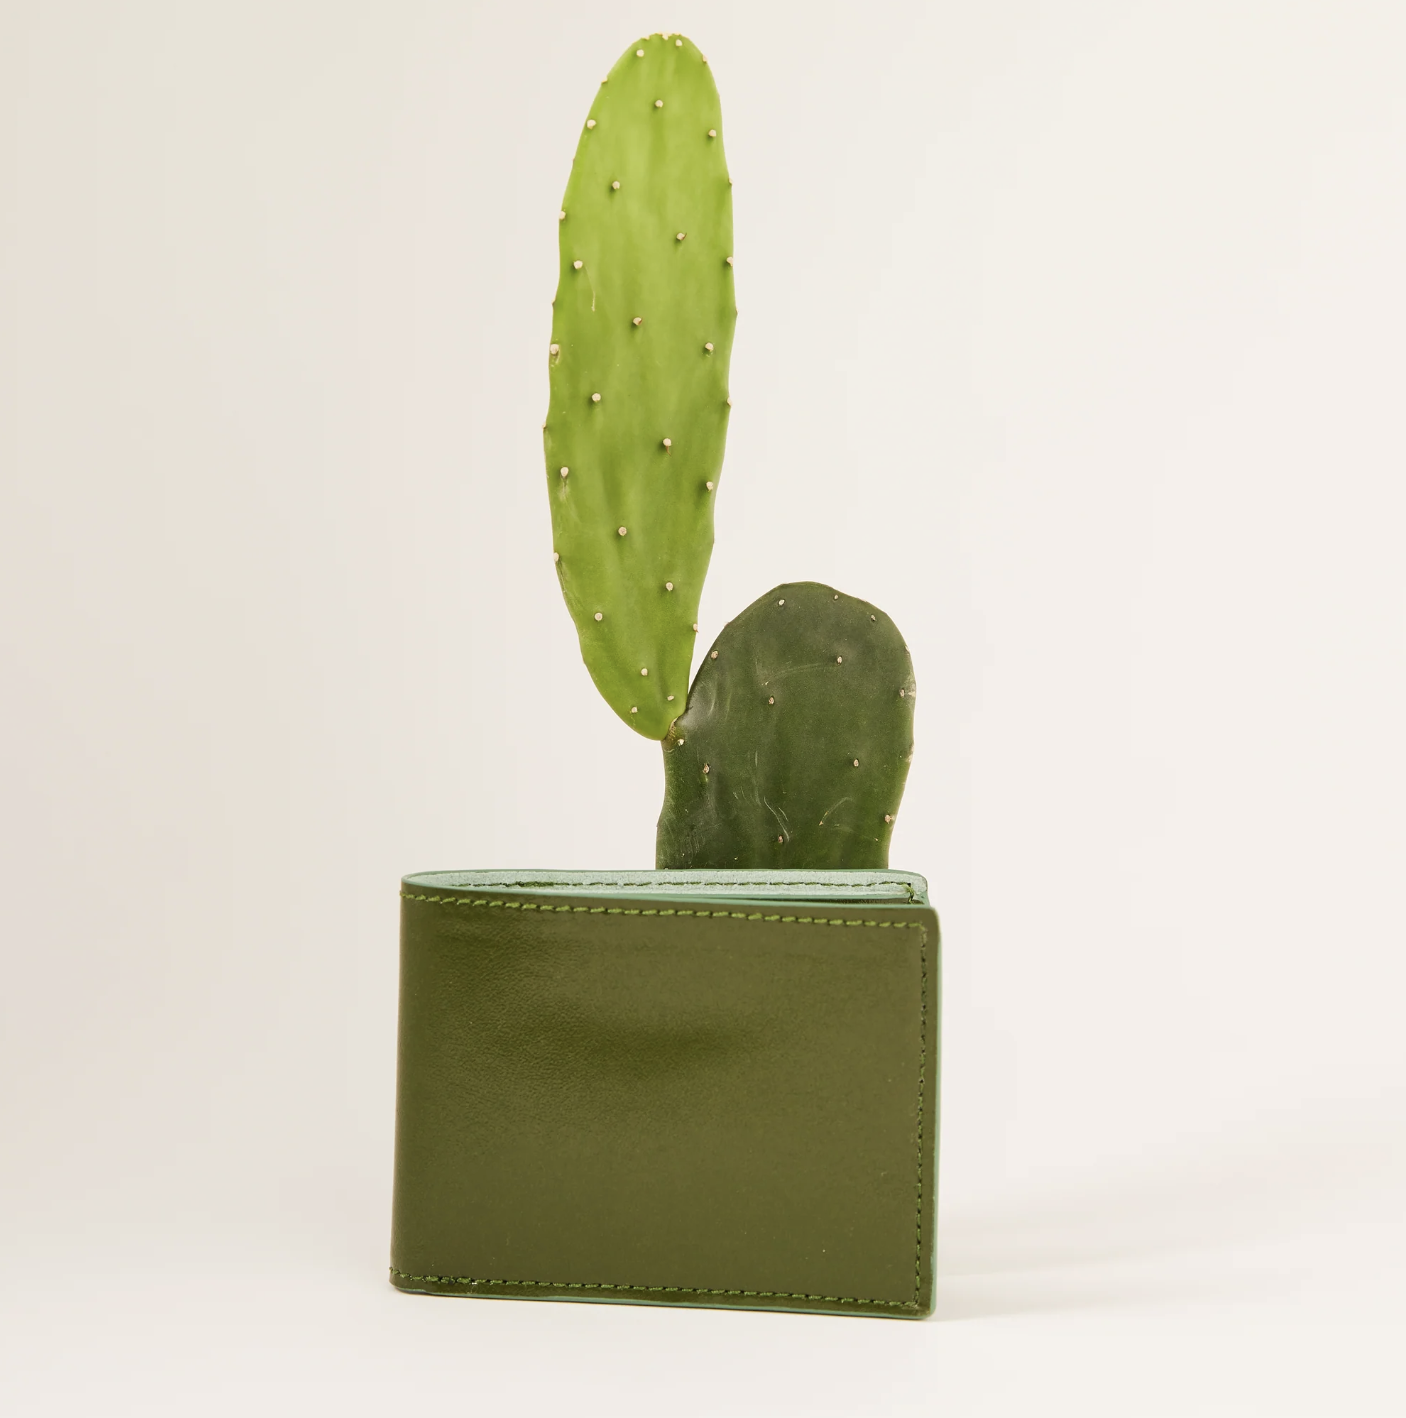 Organic Cactus Bifold Wallet review and promo code